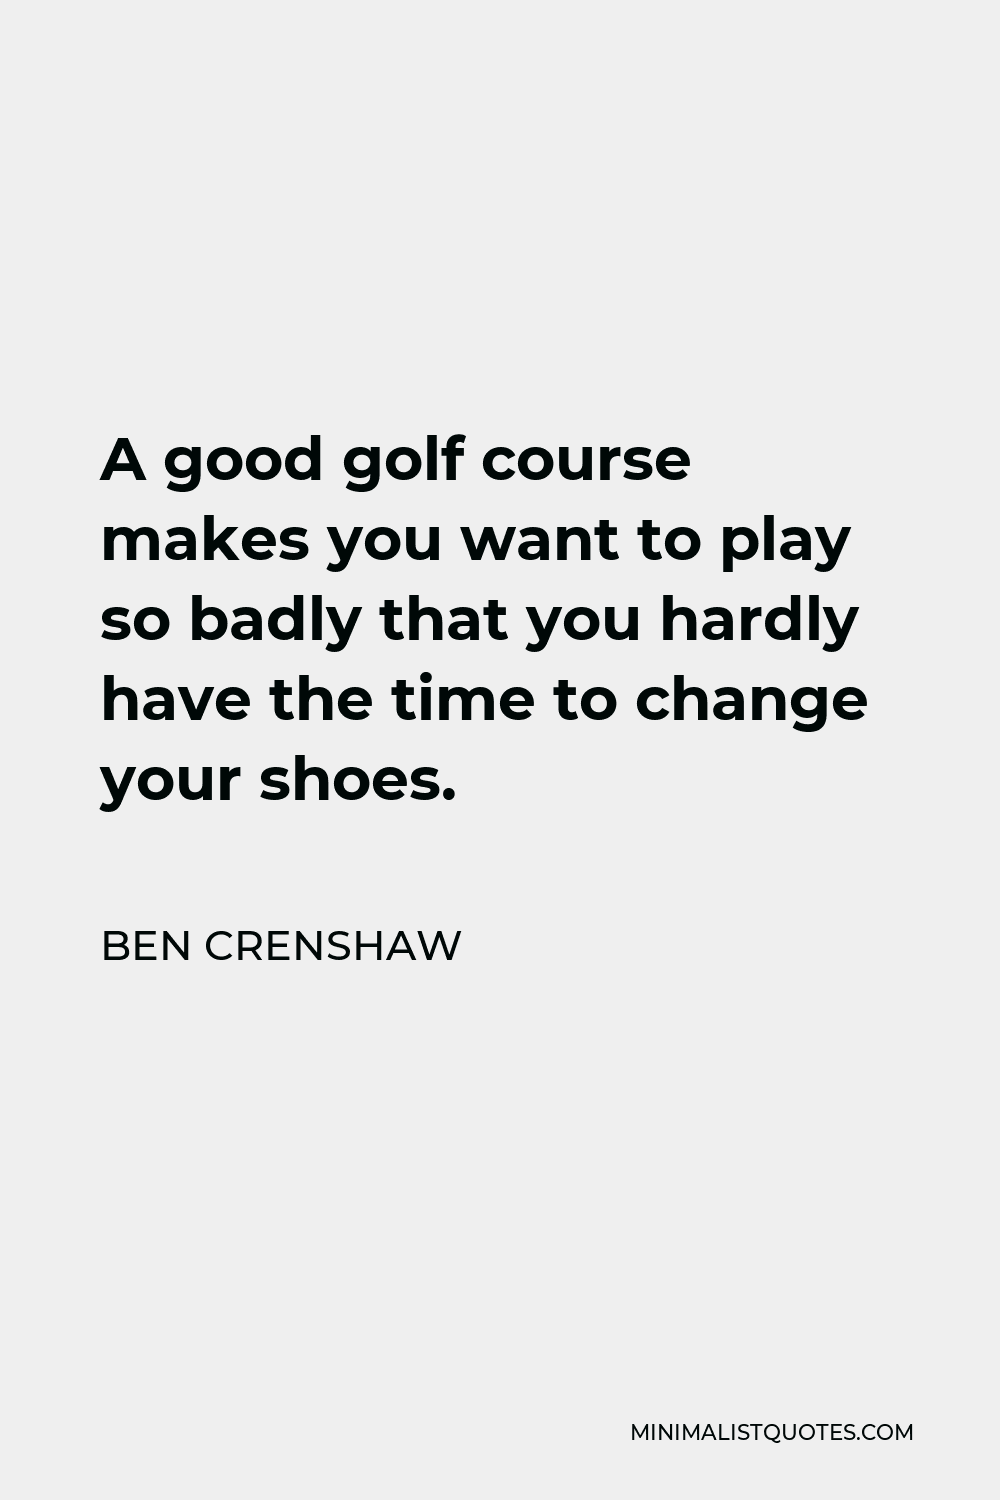 Ben Crenshaw Quote - A good golf course makes you want to play so badly that you hardly have the time to change your shoes.